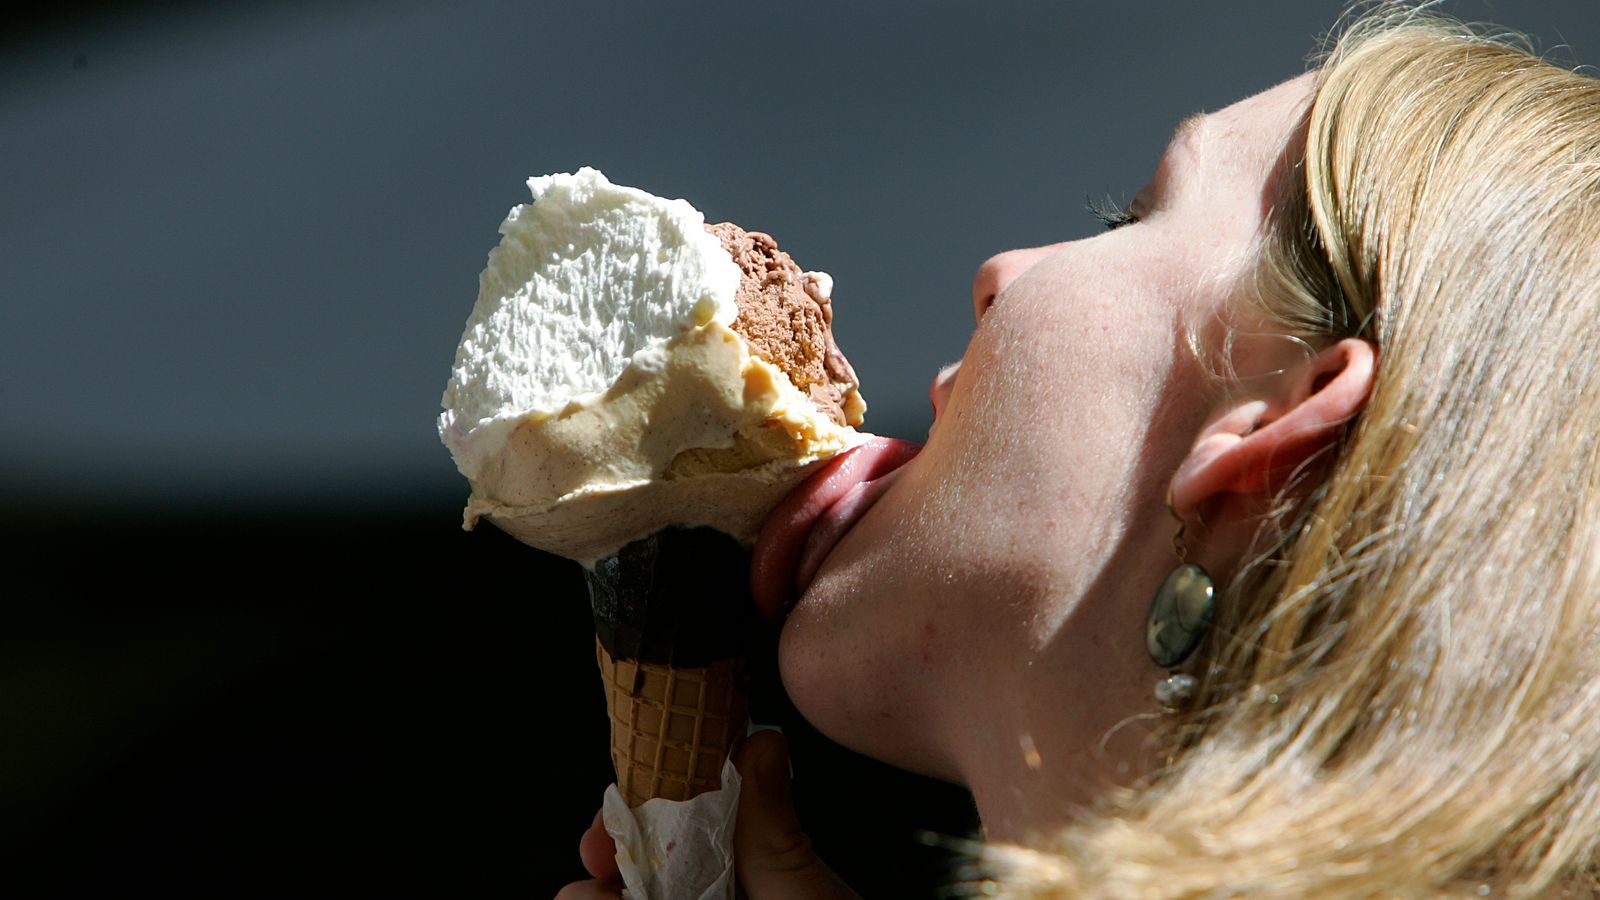 Milan poised to ban ice cream, pizza and more after midnight after new proposed law